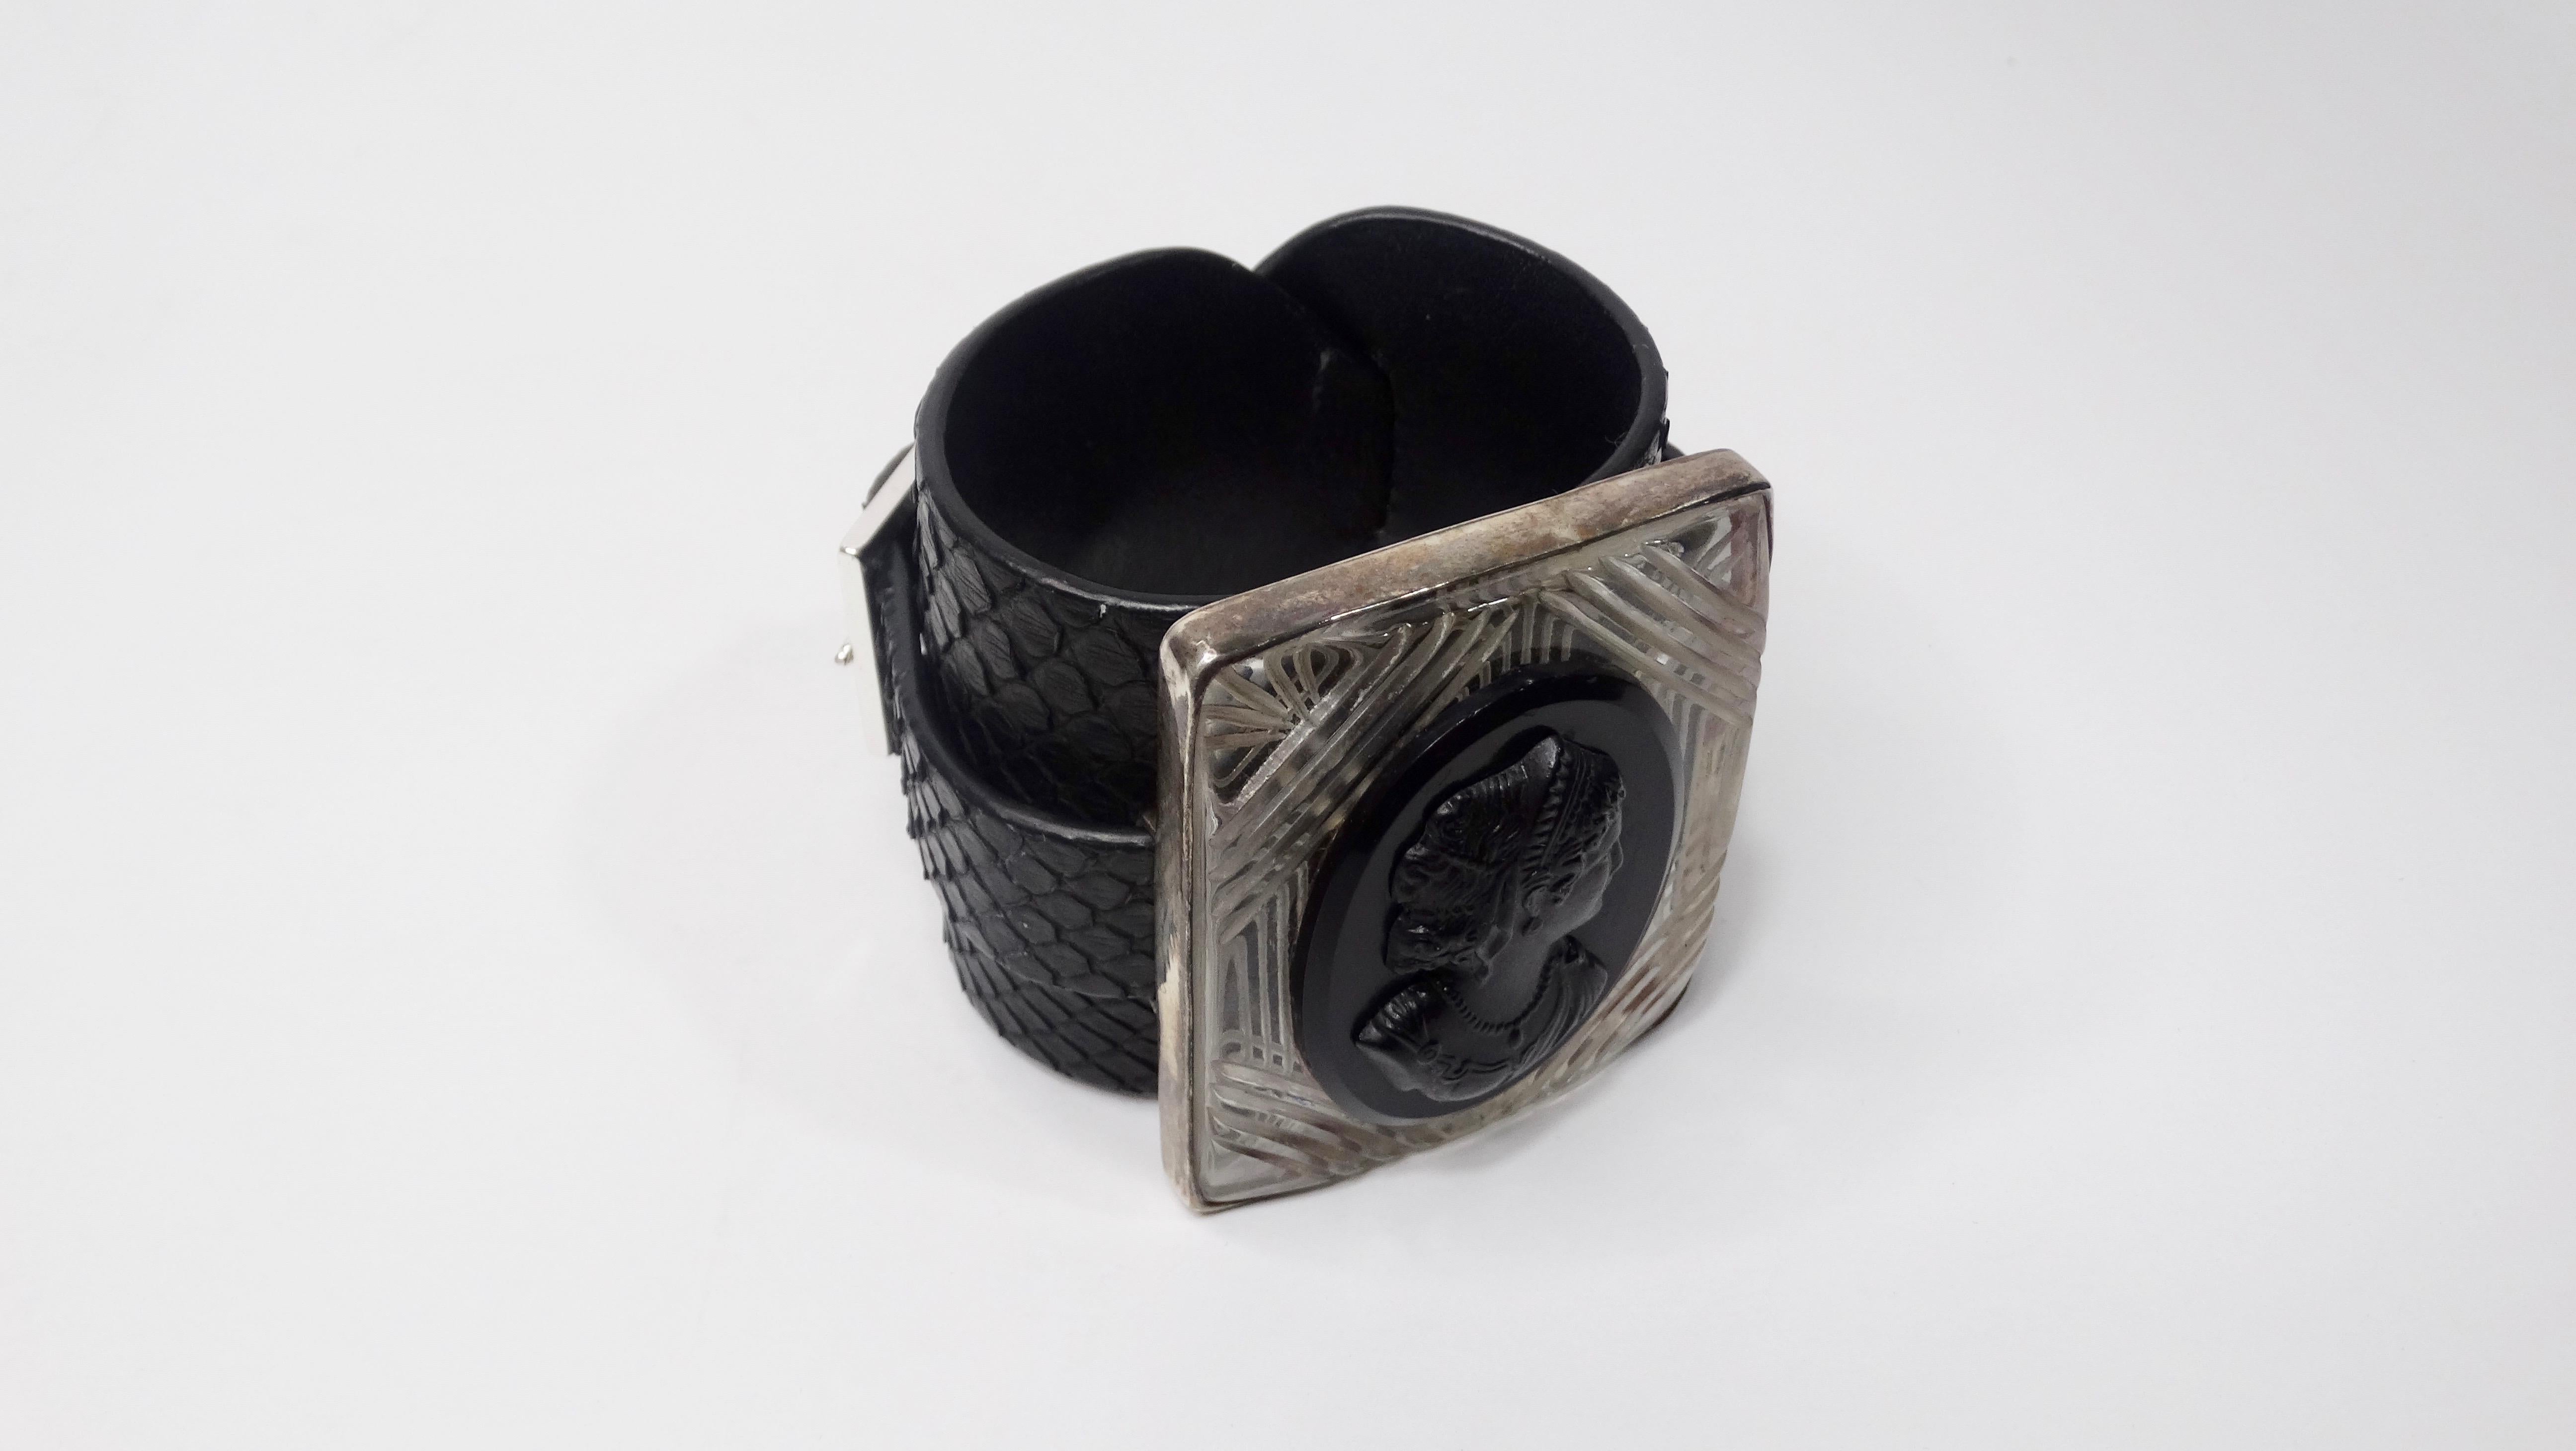 Elevate your look with this amazing Anna Porcu cuff! Circa 1990s, this black python cuff features etched lucite with a high relief cameo of a woman on black agate. Cuff has buckle closure and is stamped Anna Porcu Italy inside. Timeless and chic,